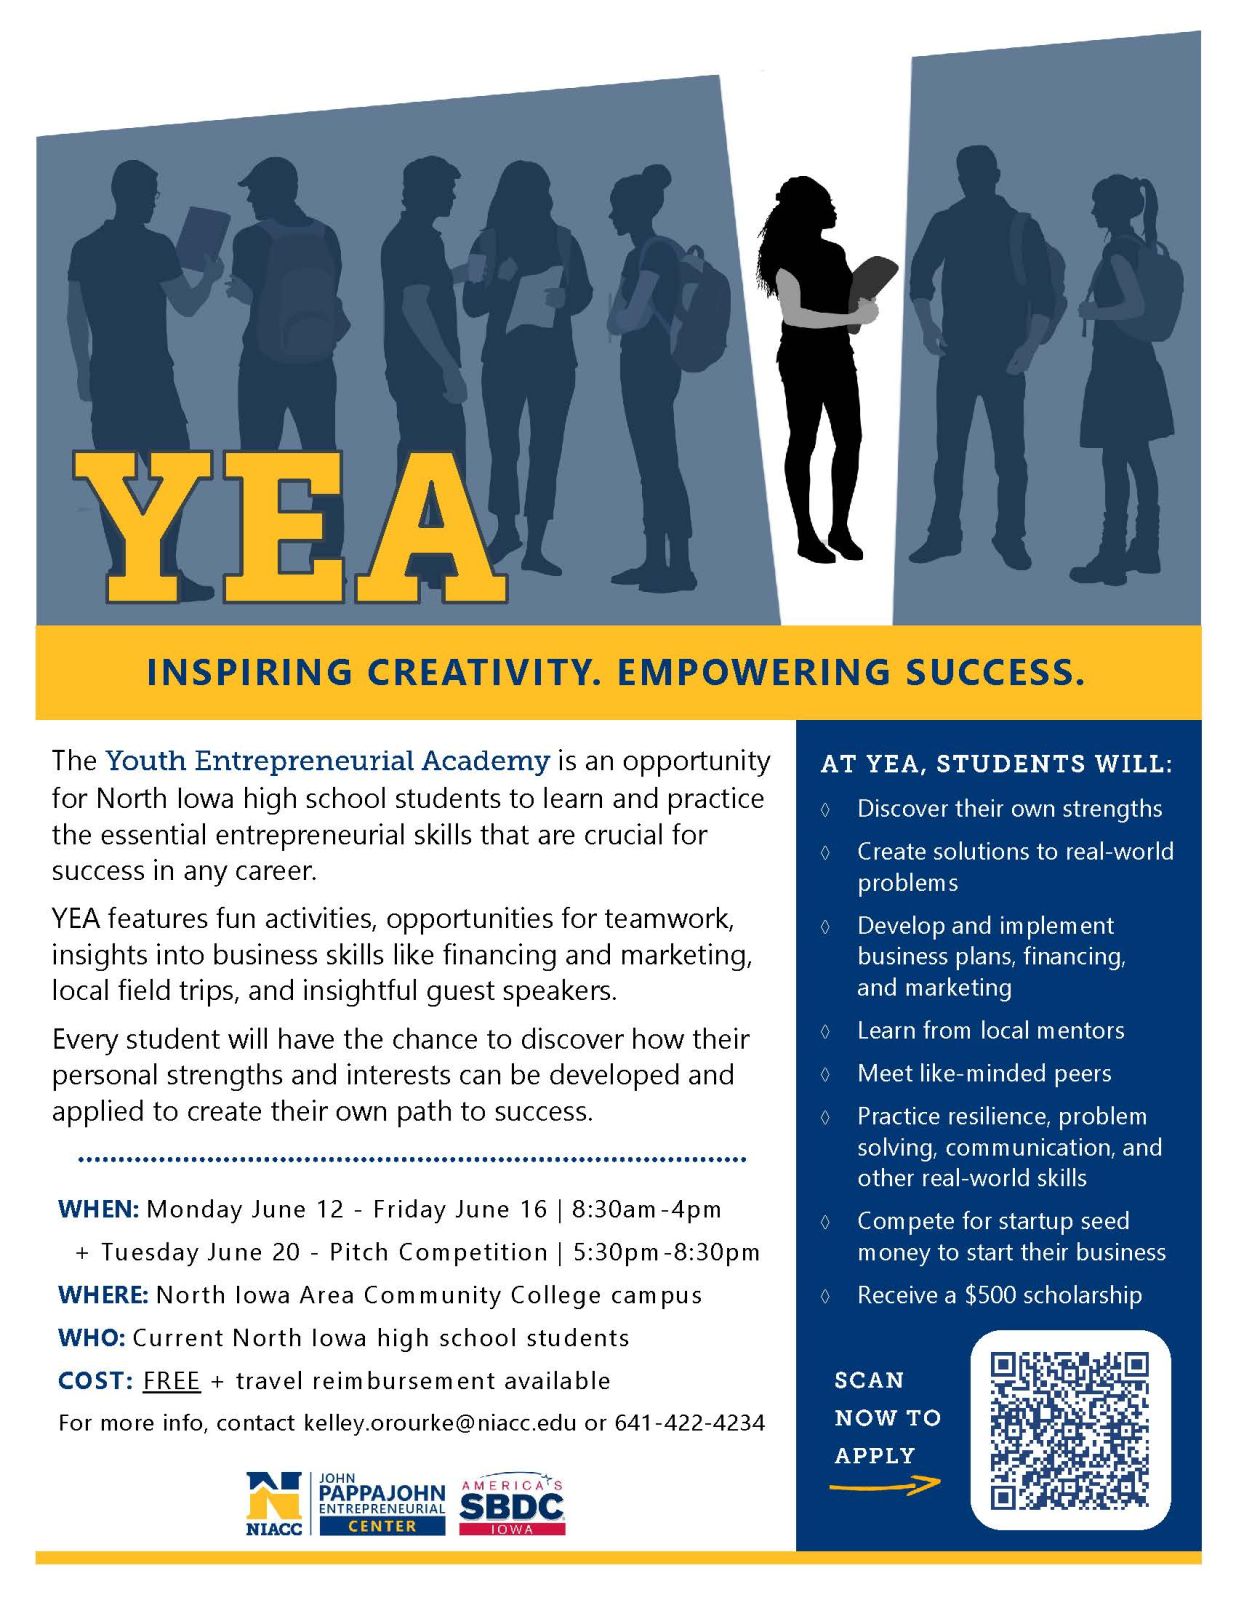 Youth Entrepreneurial Academy: An Exciting Opportunity For Student Entrepreneurs Photo